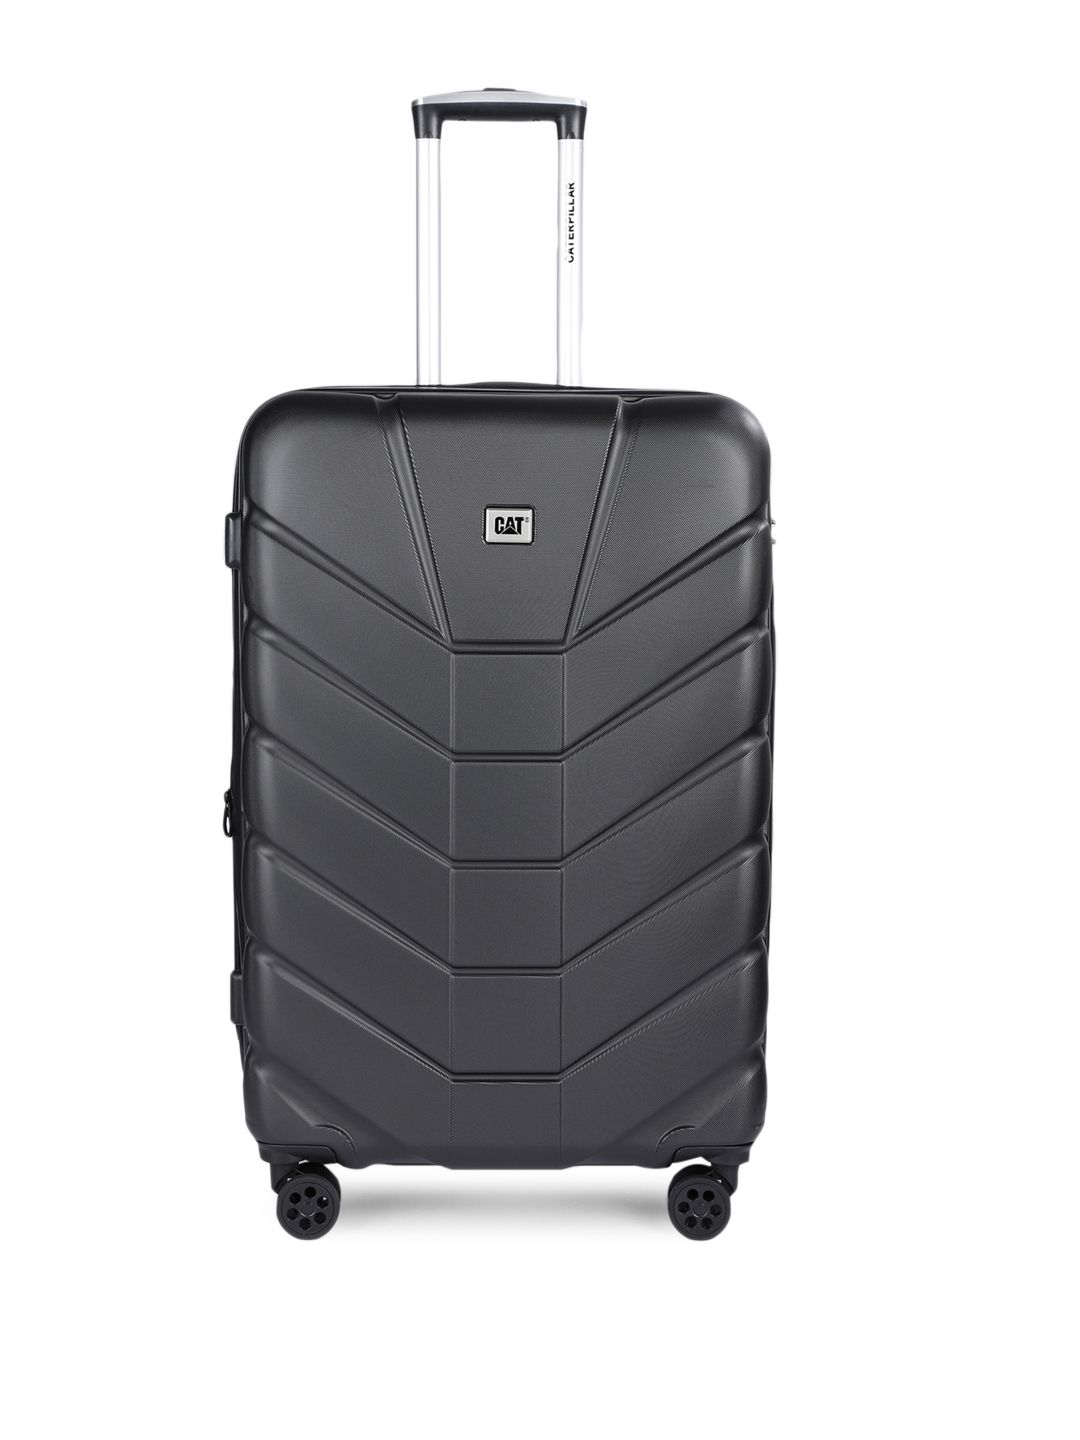 CAT Unisex Black Solid 105 L Check-In trolley Price in India